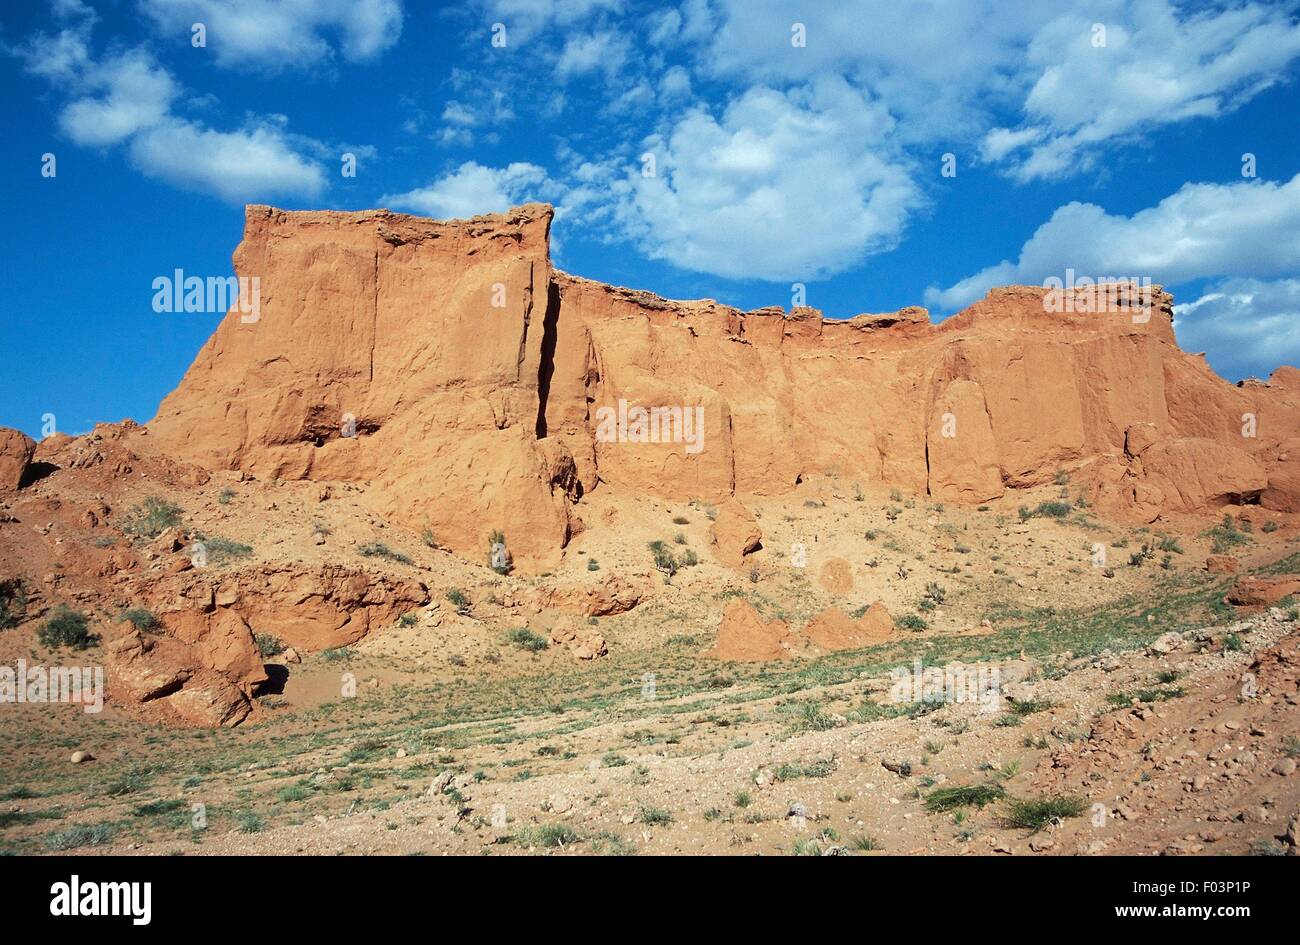 The Flaming Cliffs, sandstone mountain formation where American paleontologist Roy Chapman Andrews unearthed more than a hundred dinosaur fossils in the twenties of the twentieth century, Bayanzag Valley, Gobi Desert, Mongolia. Stock Photo